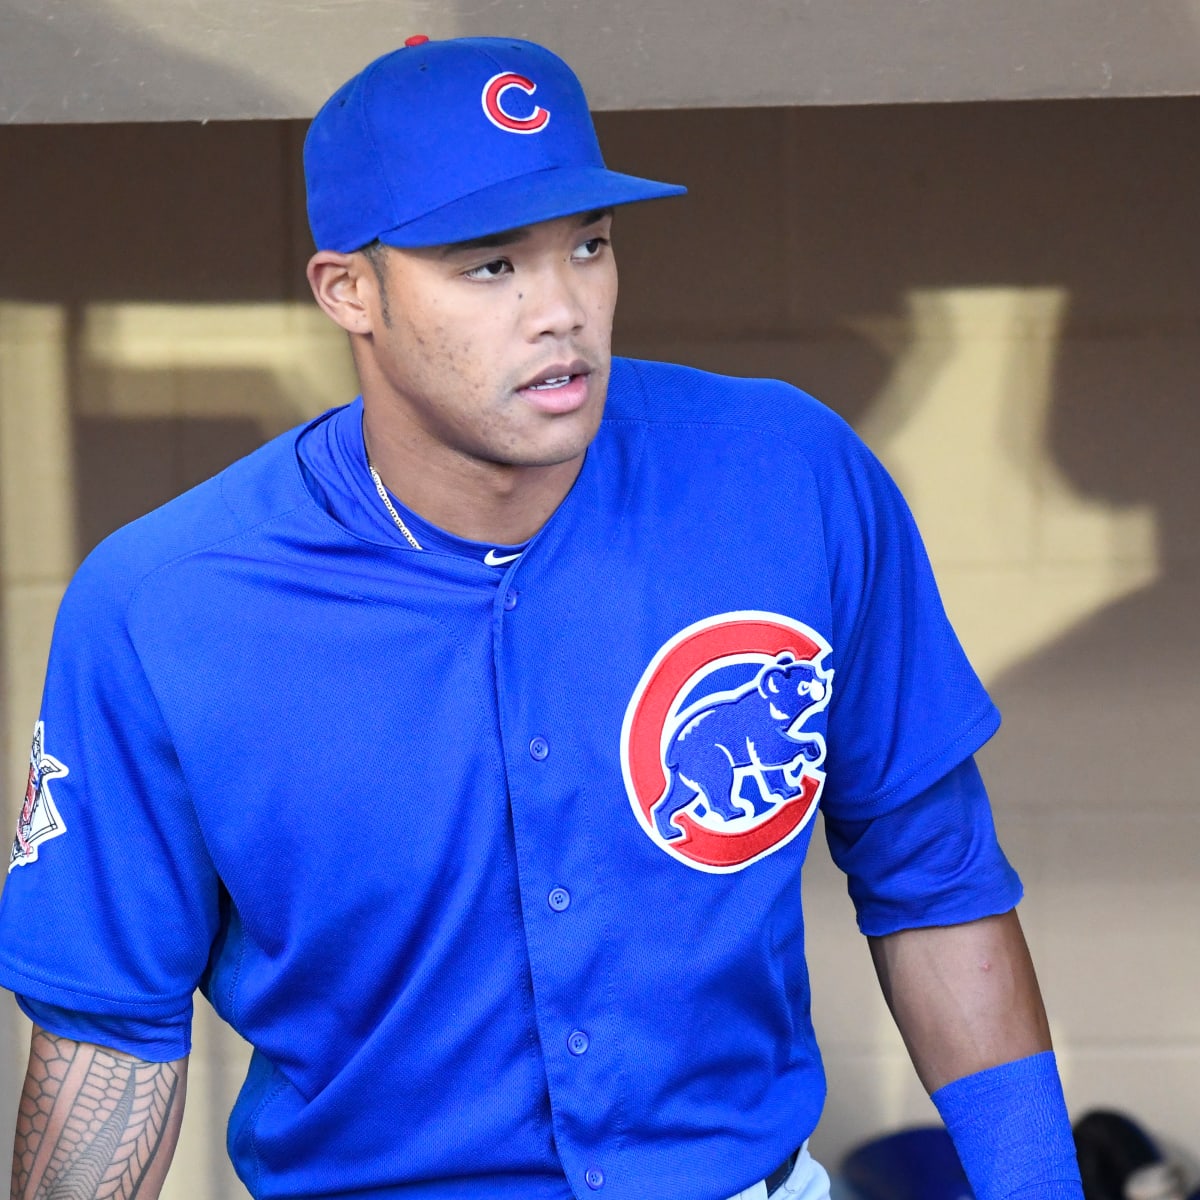 Addison Russell: Cubs shortstop to stay in Triple-A after suspension -  Sports Illustrated